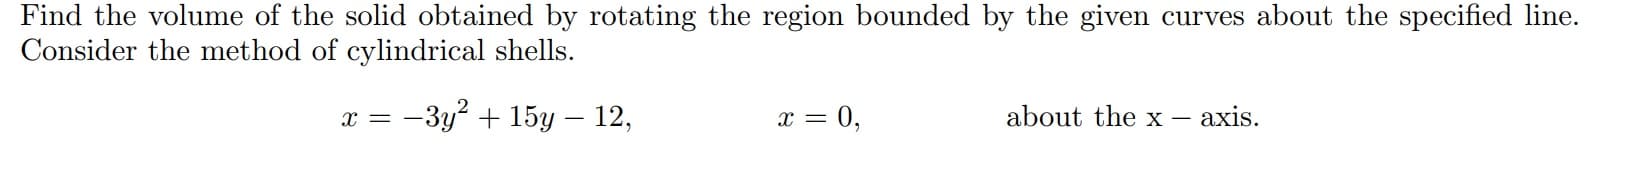 Find the volume of the solid obtained by rotating the region bounded by the given curves about the specified line.
Consider the method of cylindrical shells.
x = -3y² + 15y – 12,
x = 0,
about the x
axis.
